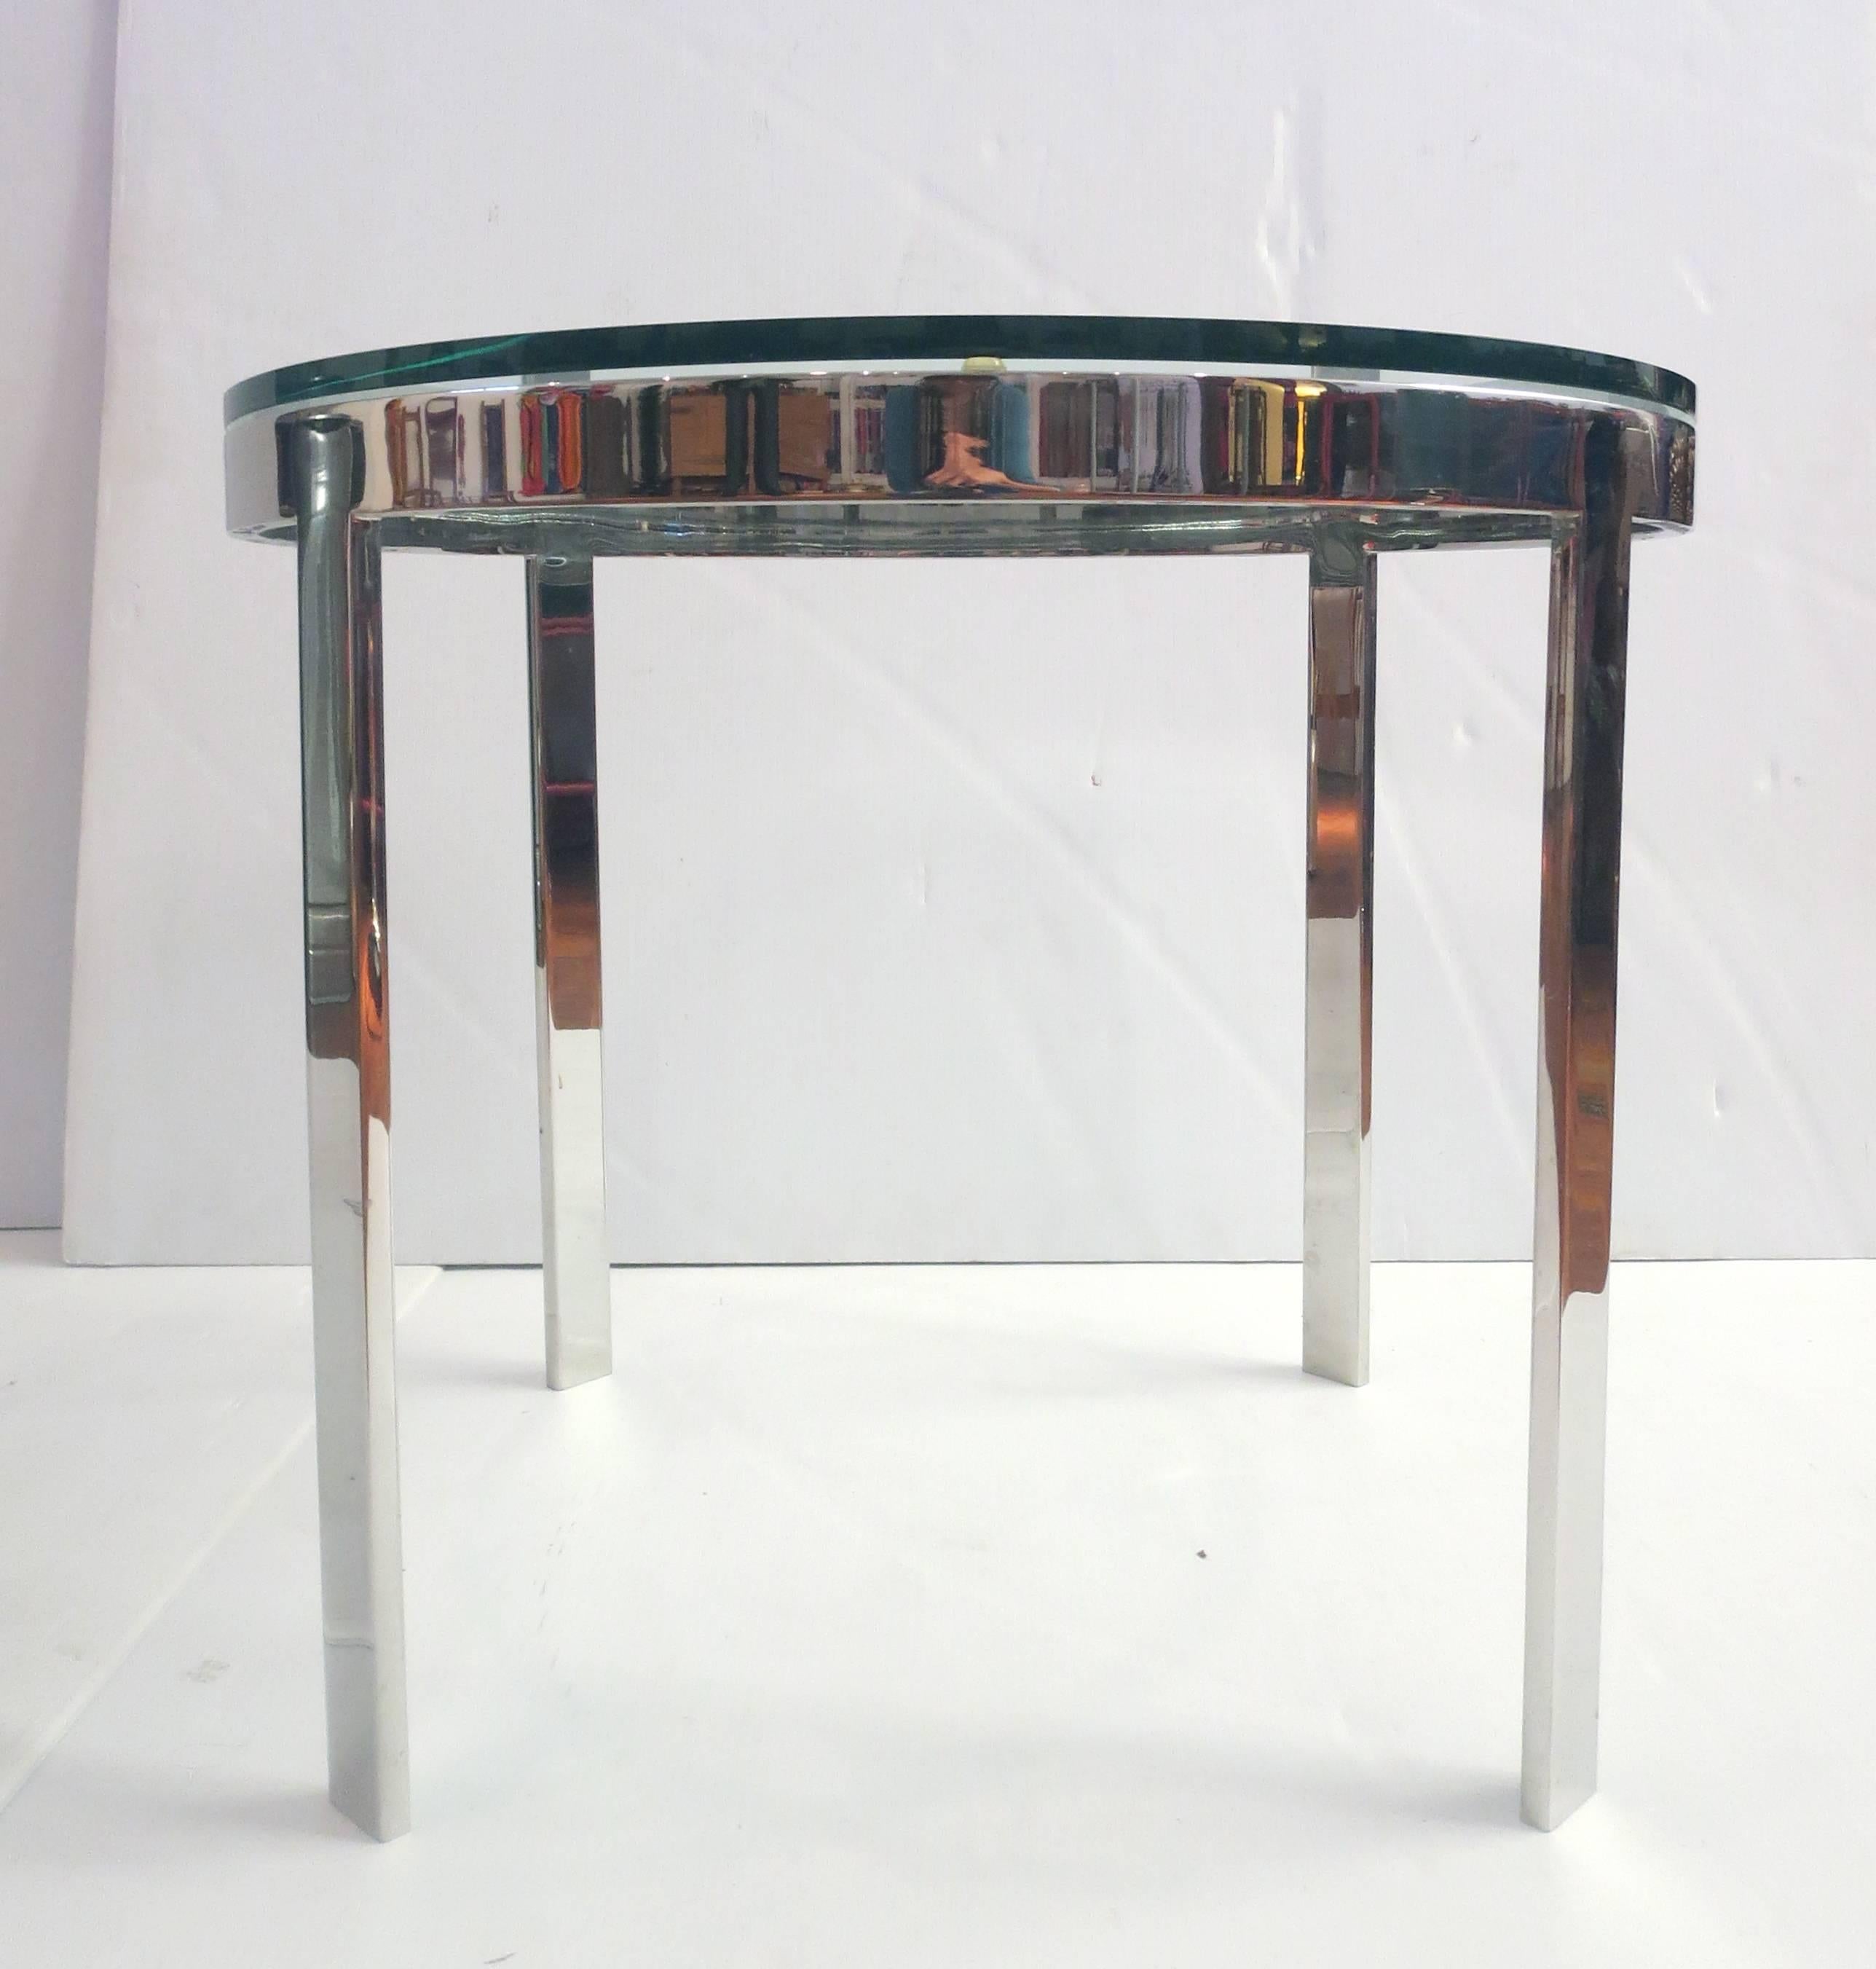 A very unique solid polished steel with thick glass round top cocktail table by Nicos Zographos circa 1970s. This fine quality table is very heavy because it is solid steel. In very nice condition. The glass shows no cracks or chips.